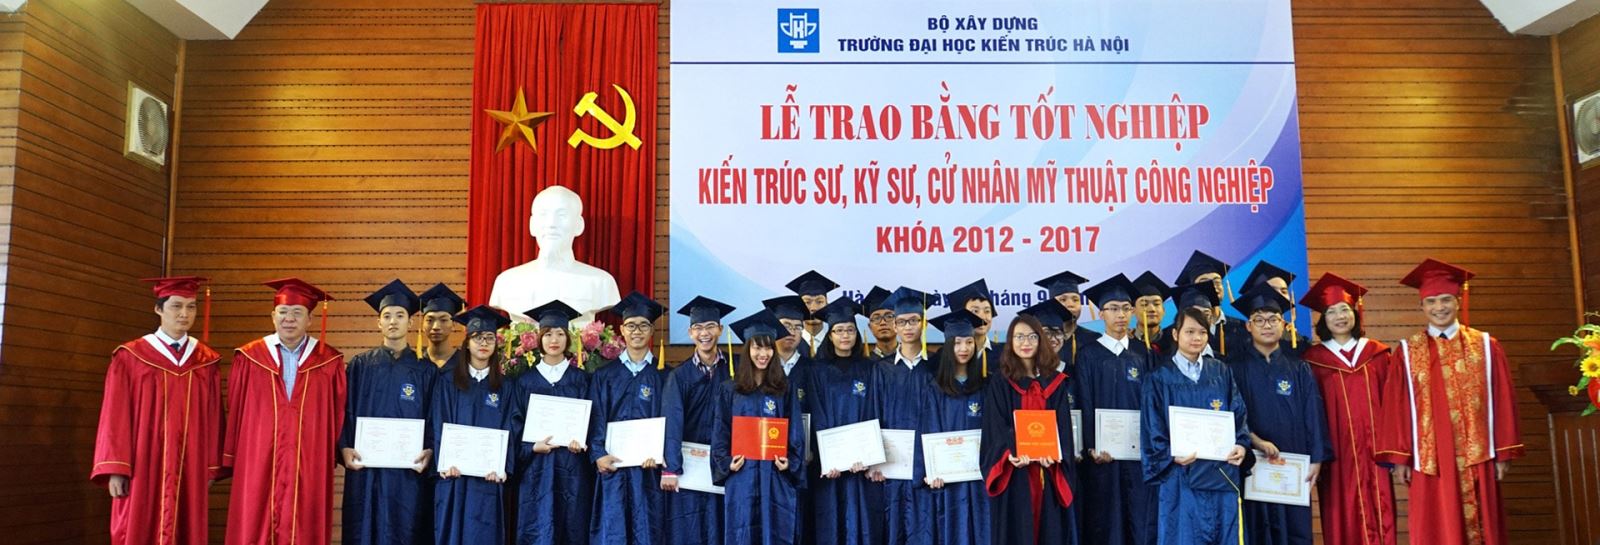 Hanoi Architectural University awarded the graduates of the course 2012 - 2017 for the new architects, engineers, Bachelor of Fine Arts